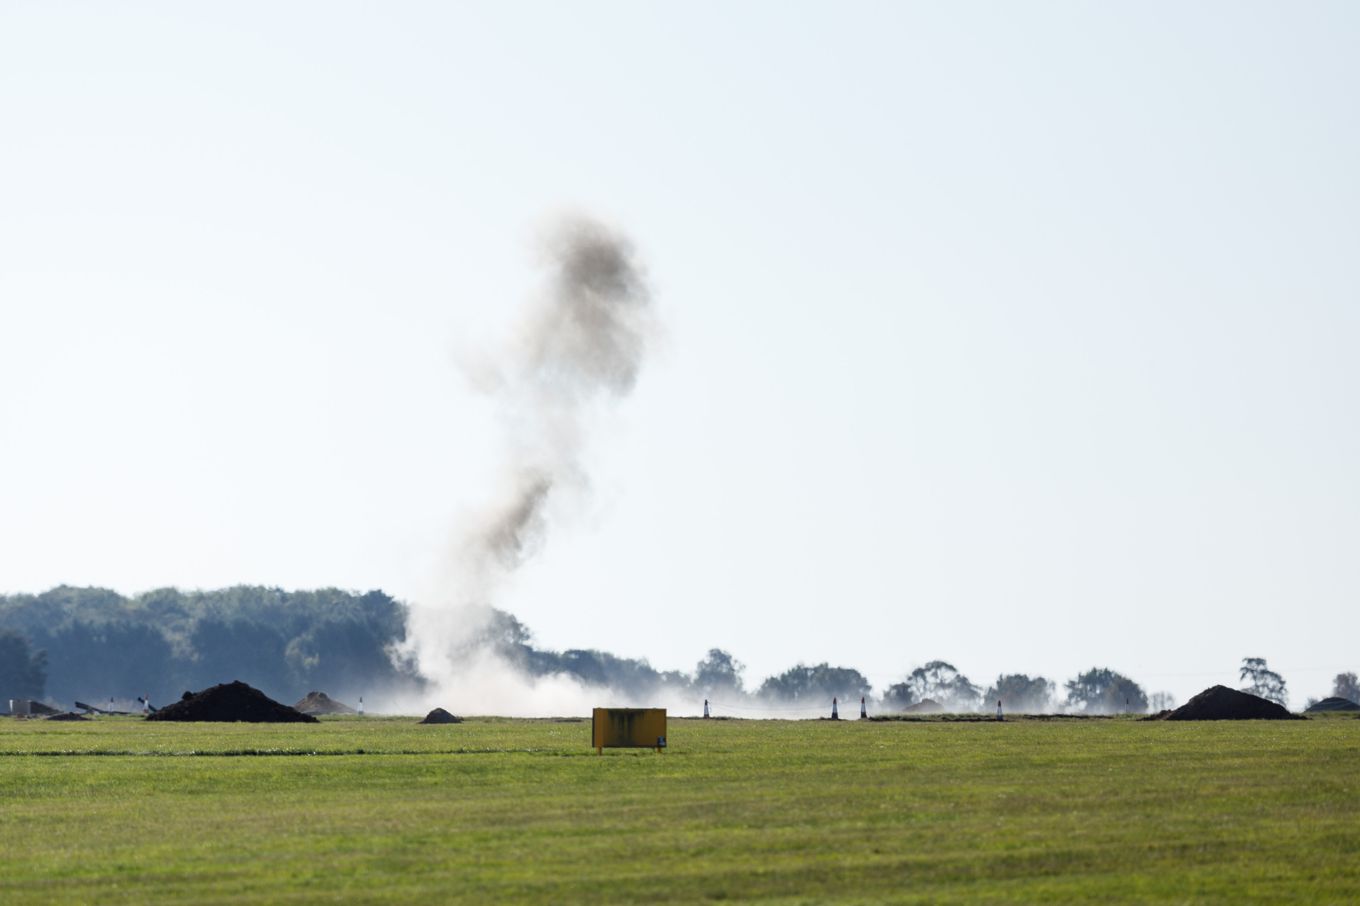 Controlled demolition on RAFC Cranwell Airfield.